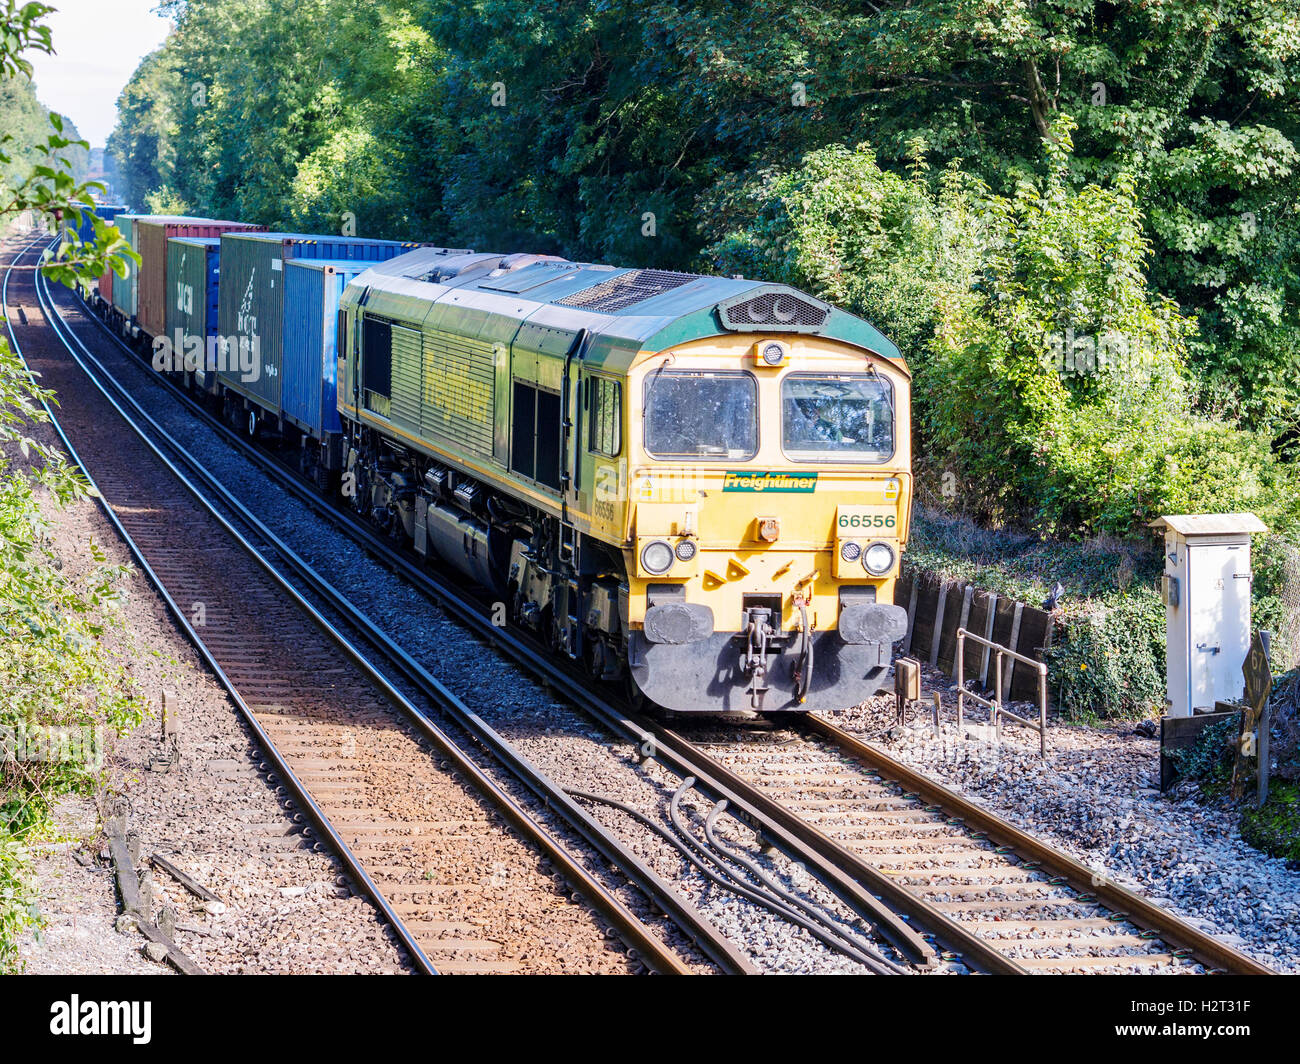 A Freightliner container train hauled by a Class 66 diesel locomotive in Freightliner livery passes St Cross near Winchester. Stock Photo